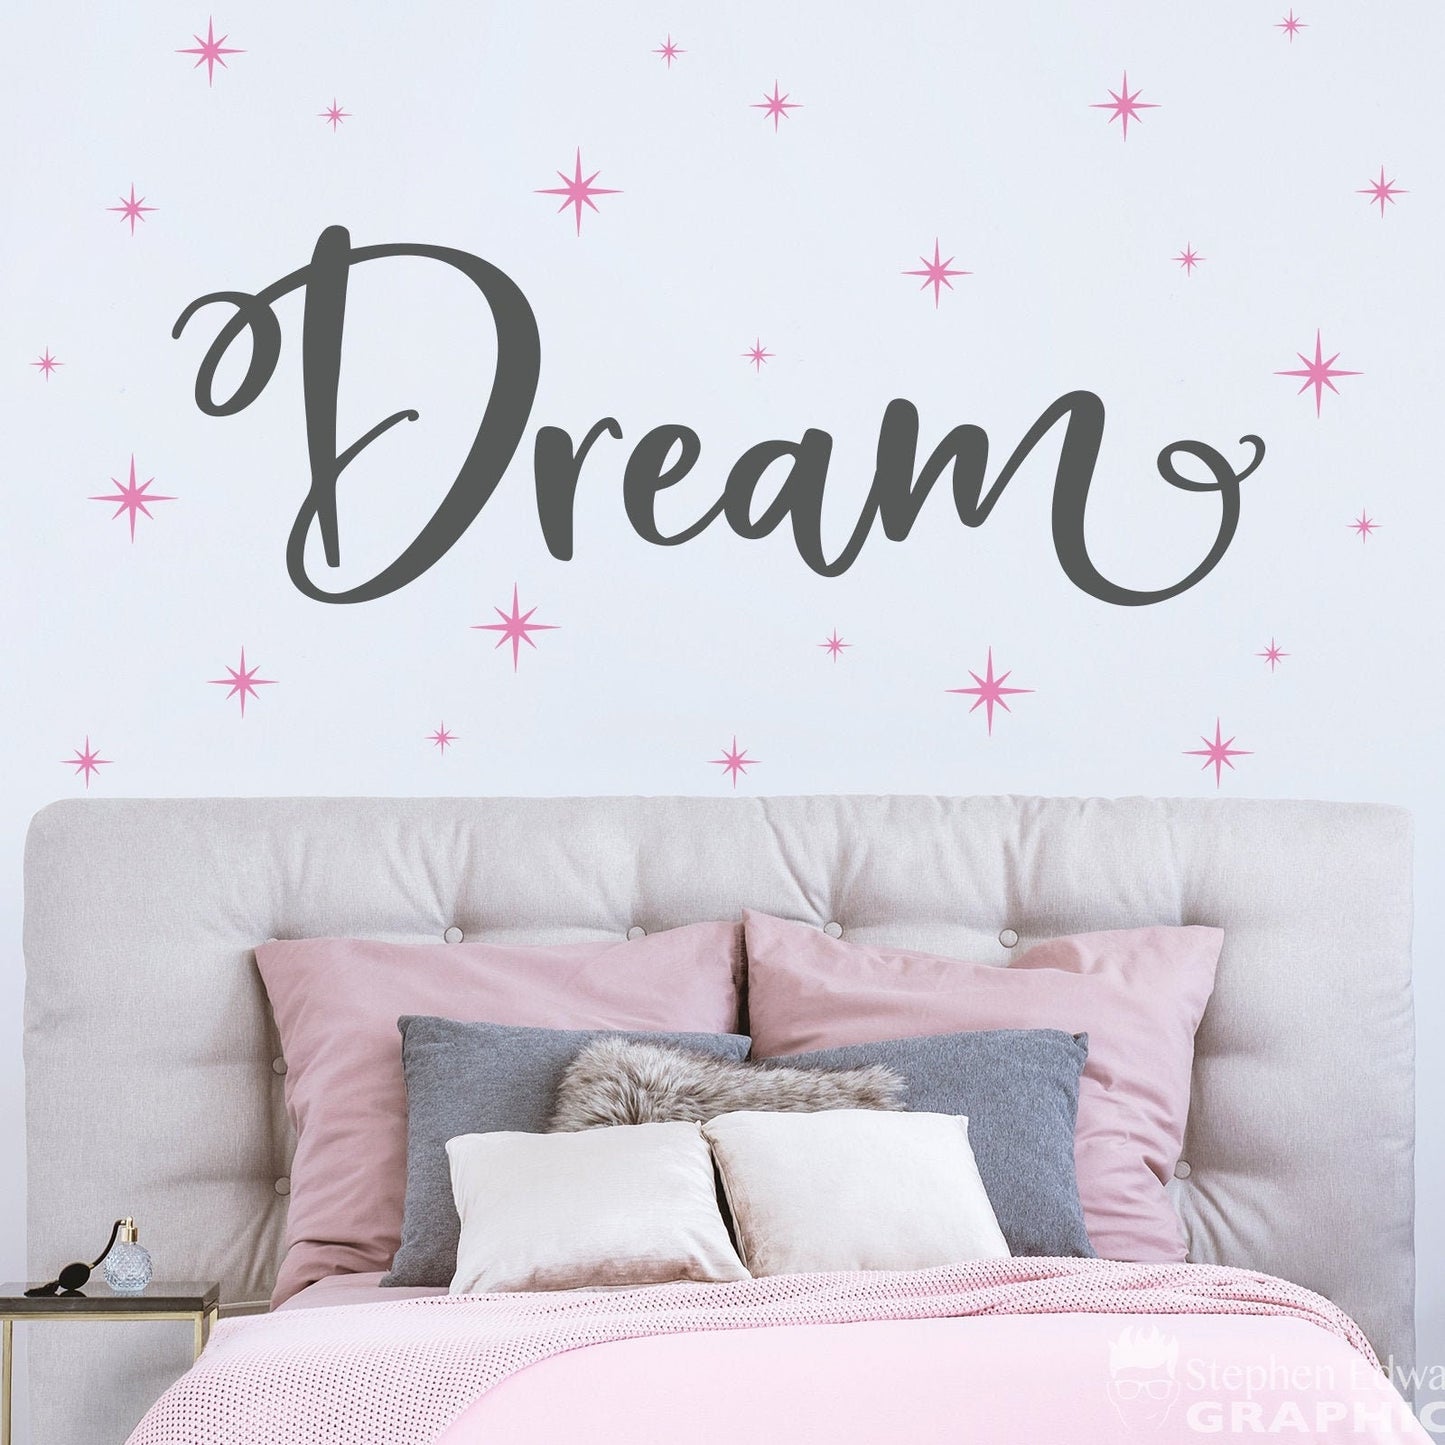 Dream Decal with Sparkles - Bedroom Wall Decor - Wall Sticker